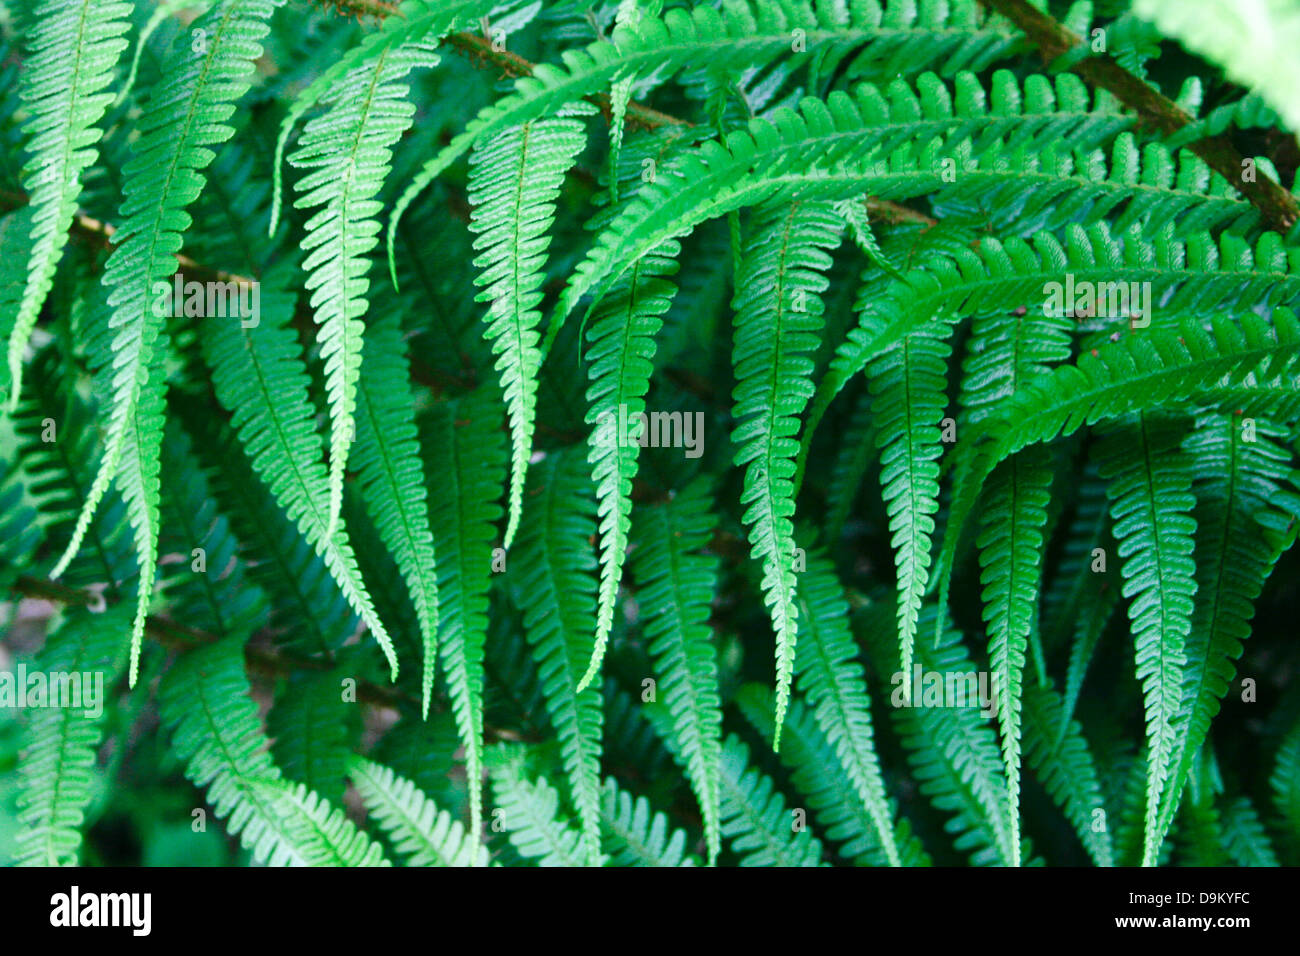 fronds of fern Stock Photo